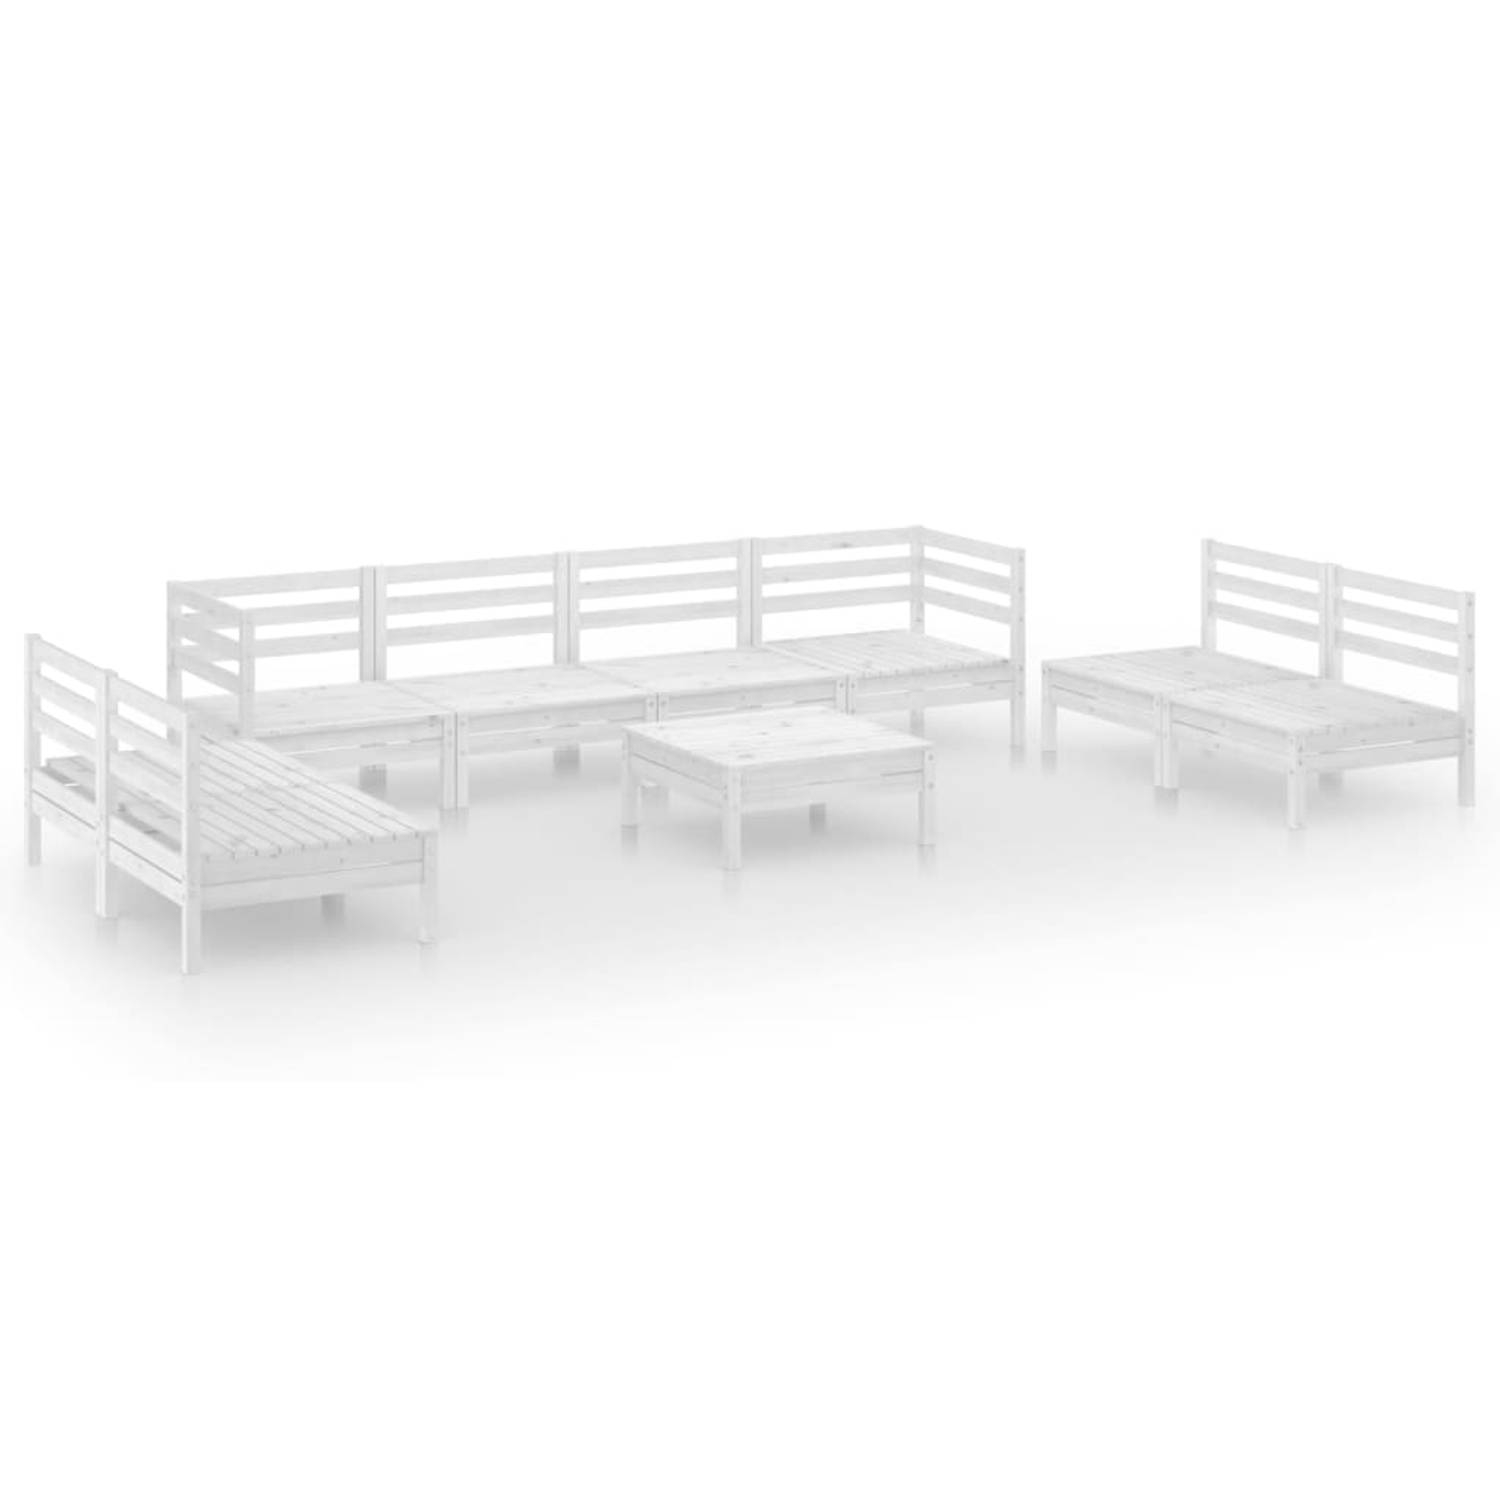 The Living Store  Tuinset  Grenenhout  Wit  63.5 x 63.5 x 62.5 cm  Modulair